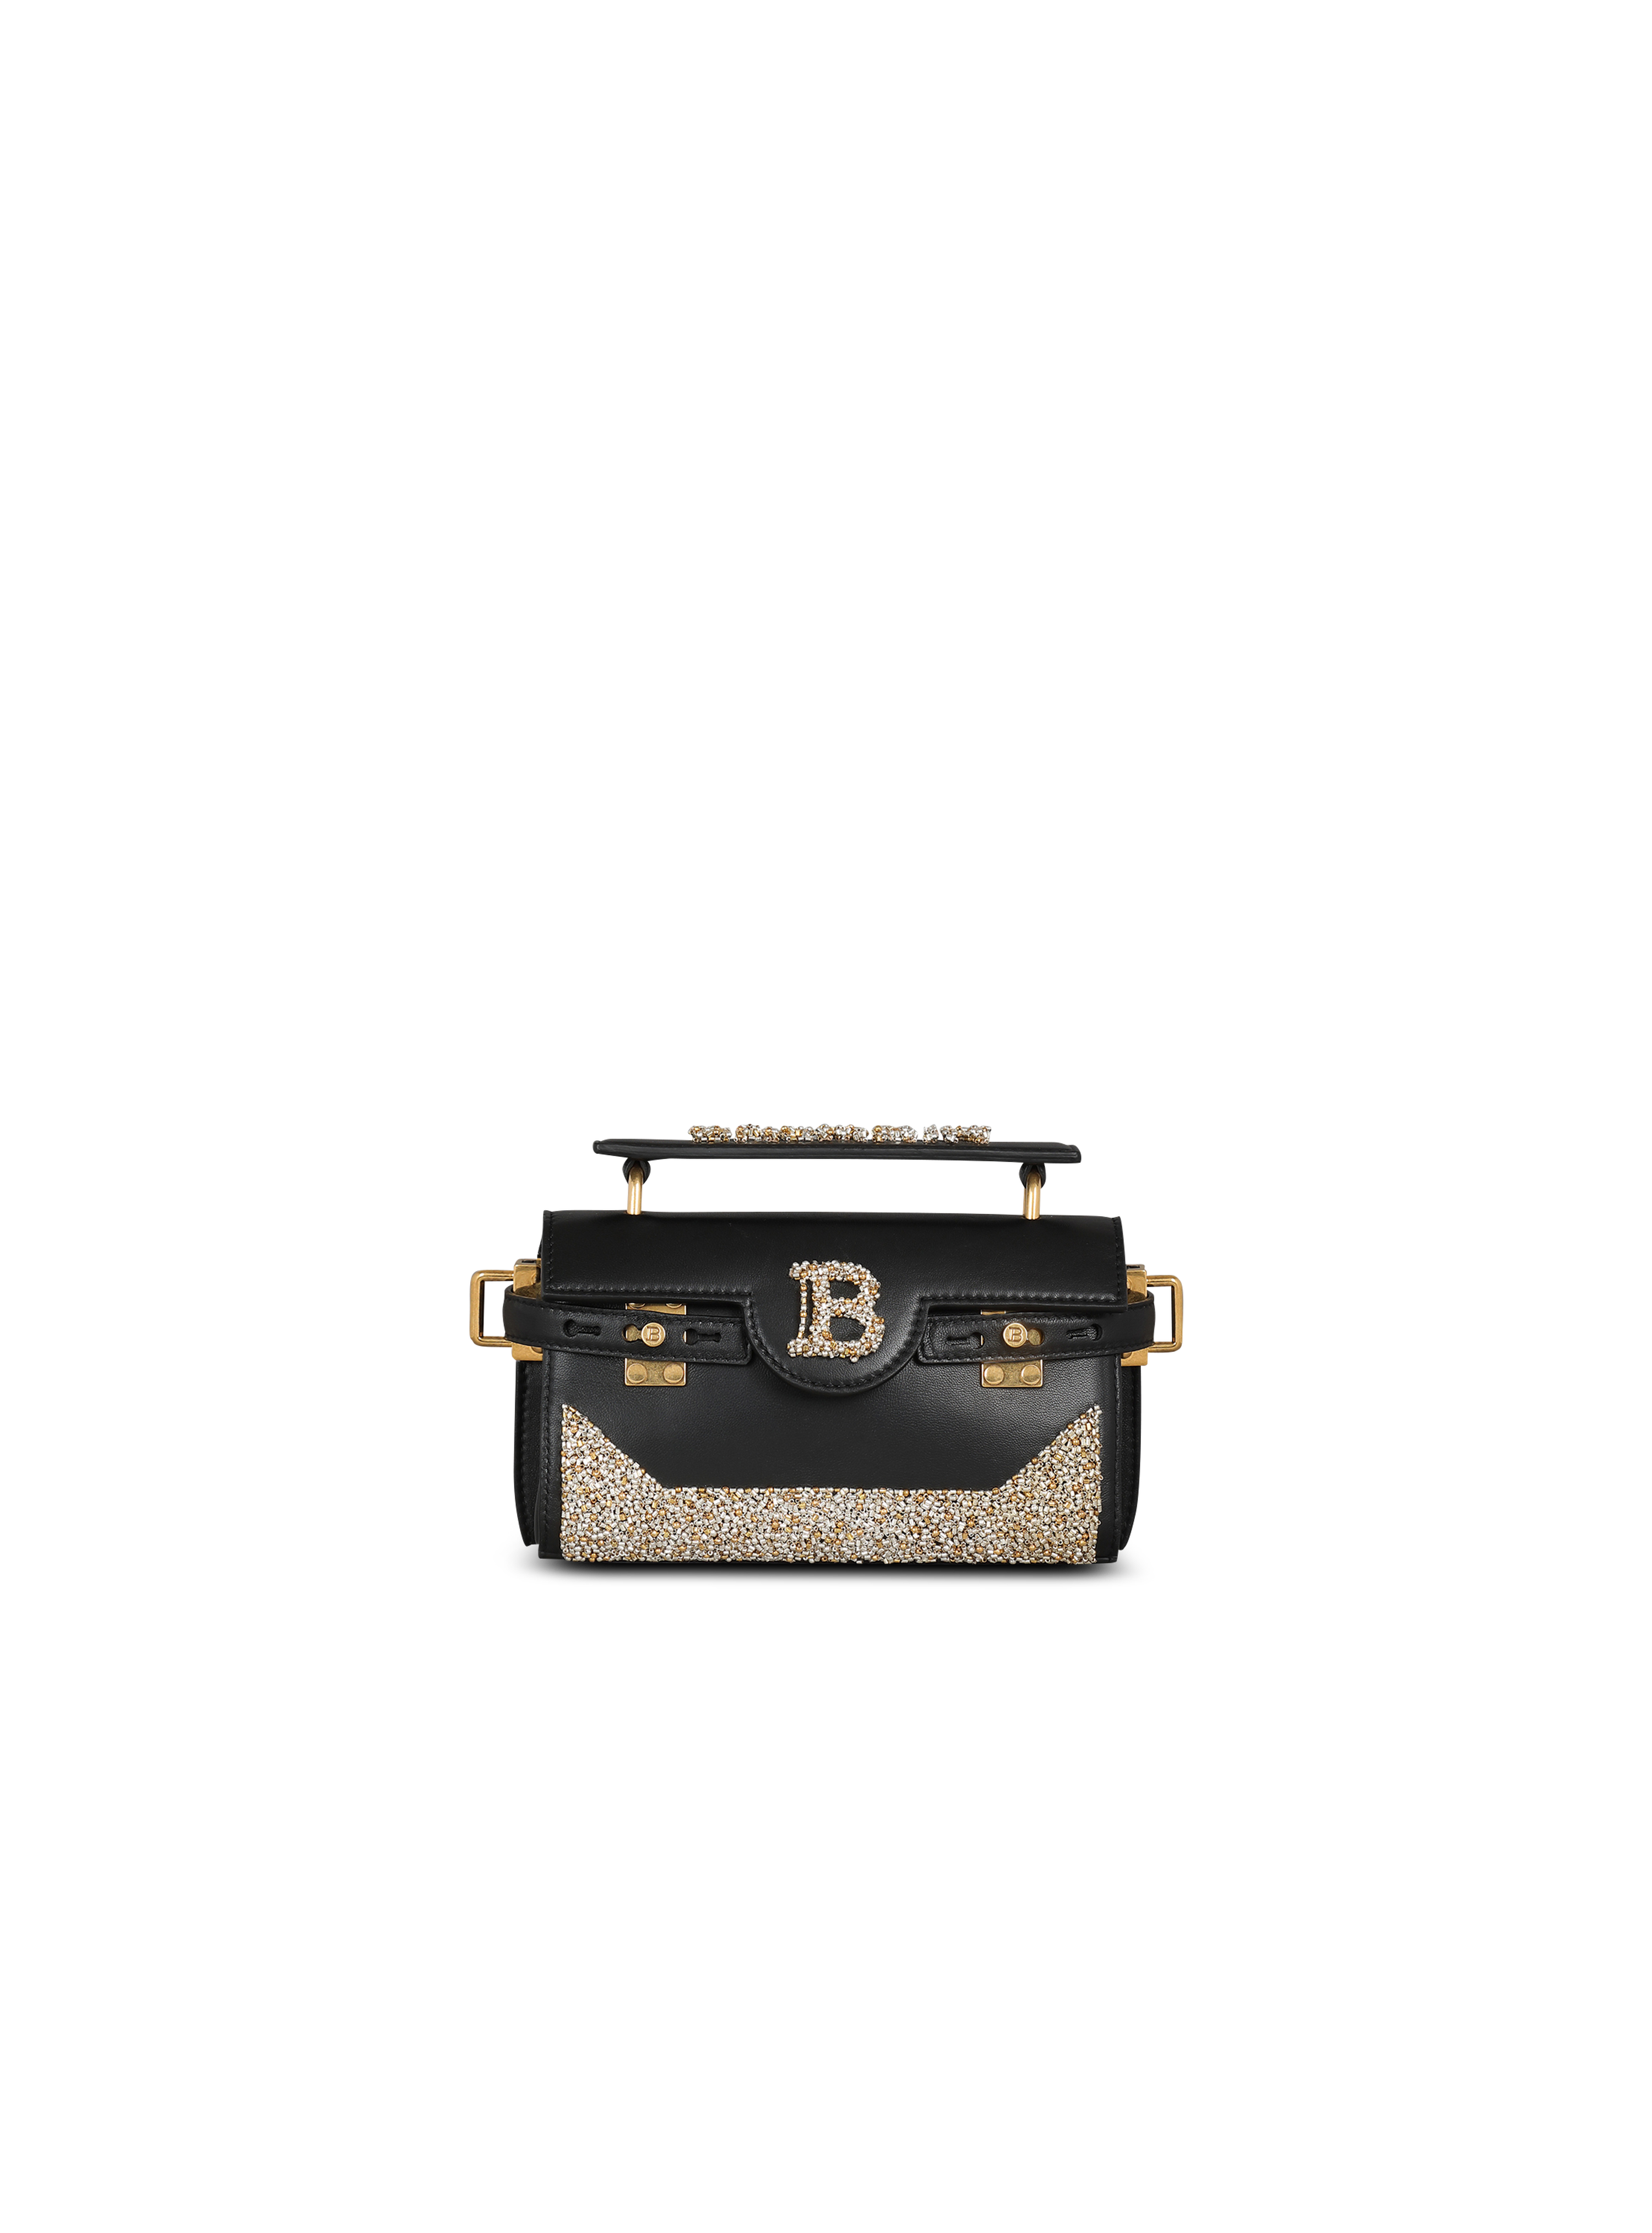 B-Buzz 19 bag in embroidered leather, black